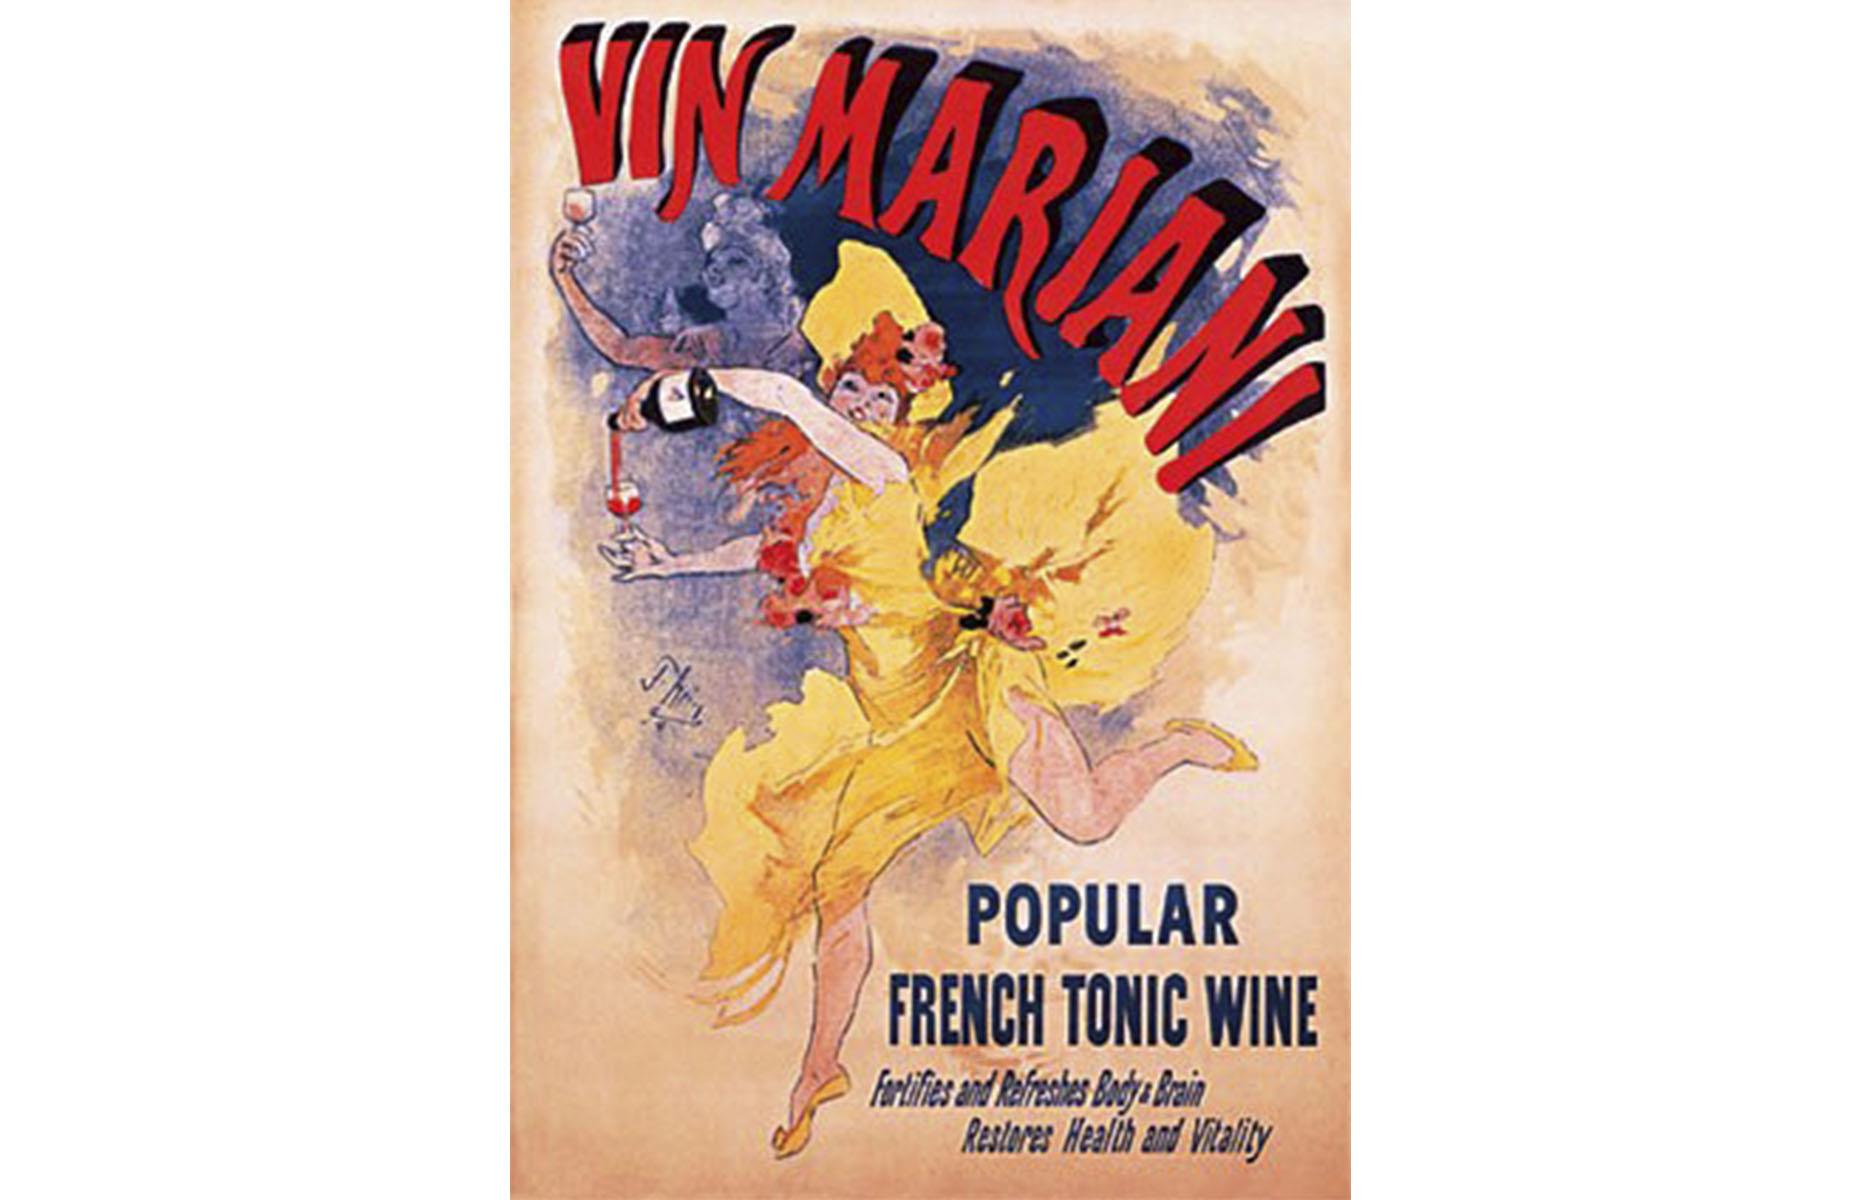 Pemberton’s inspiration for the drink was a popular concoction called Vin Mariani, invented in France. It was a mixture of Bordeaux red wine and cocaine. This poster pictured here, from 1895, shows how it was marketed as a tonic that "fortifies and refreshes the body and brain". However, the US, especially the Deep South, was in the midst of an anti-alcohol movement. This gave Pemberton the idea of creating a drink for those who were abstinent.